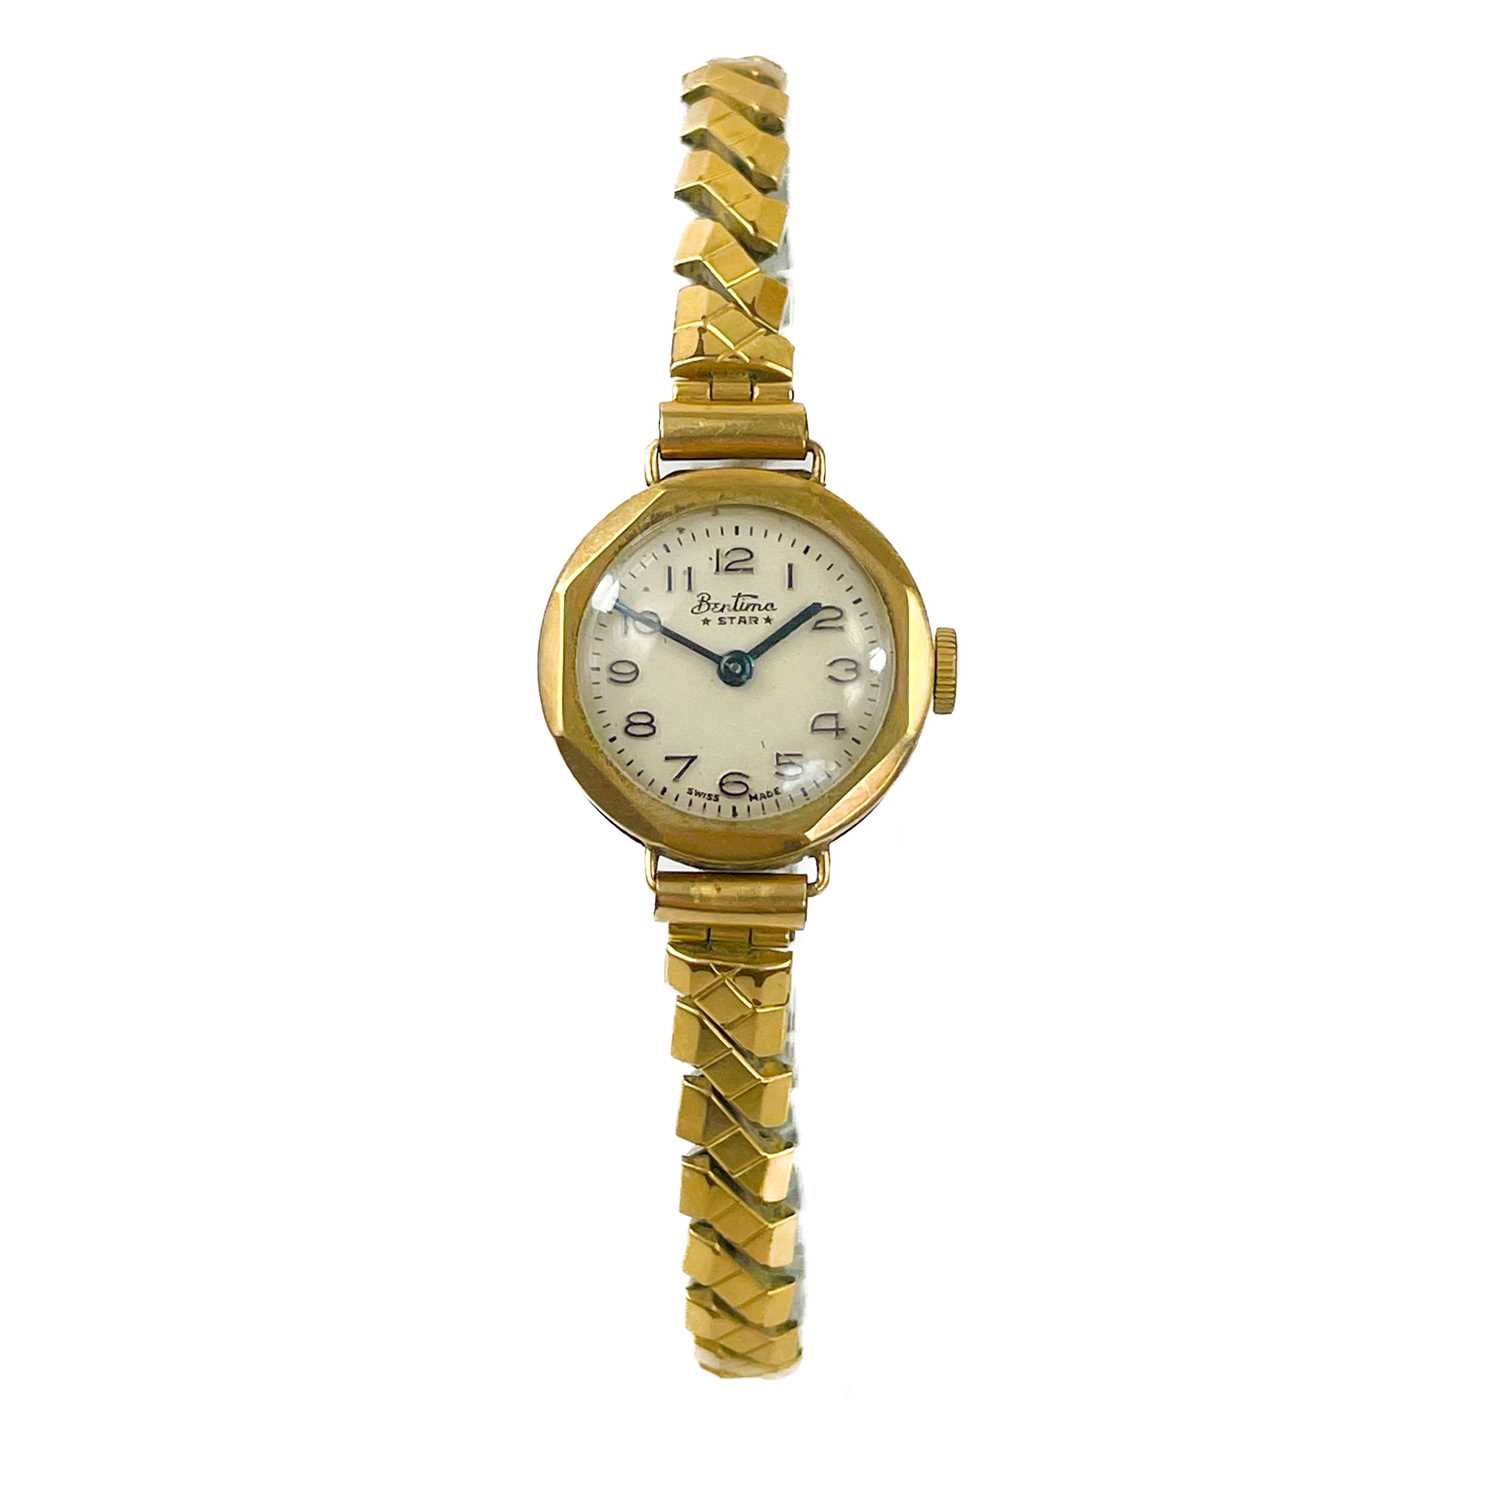 Three 9ct gold-cased lady's manual wind wristwatches and a 9ct expanding bracelet. - Image 6 of 9